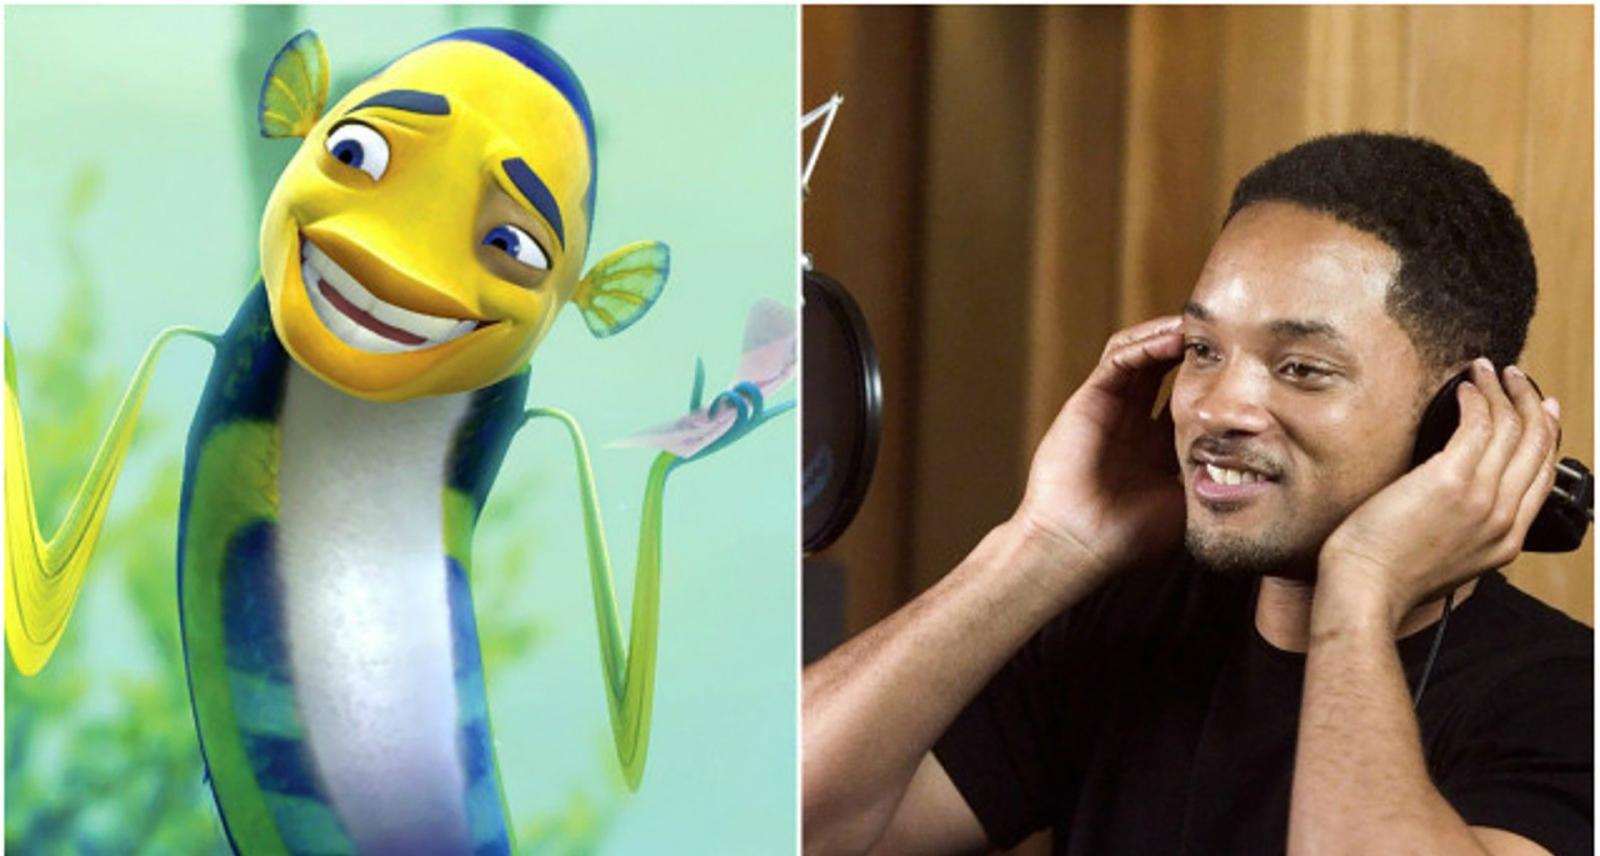 9 Cartoon Characters Based On Celebrities: Their Resemblance is Uncanny - image 2